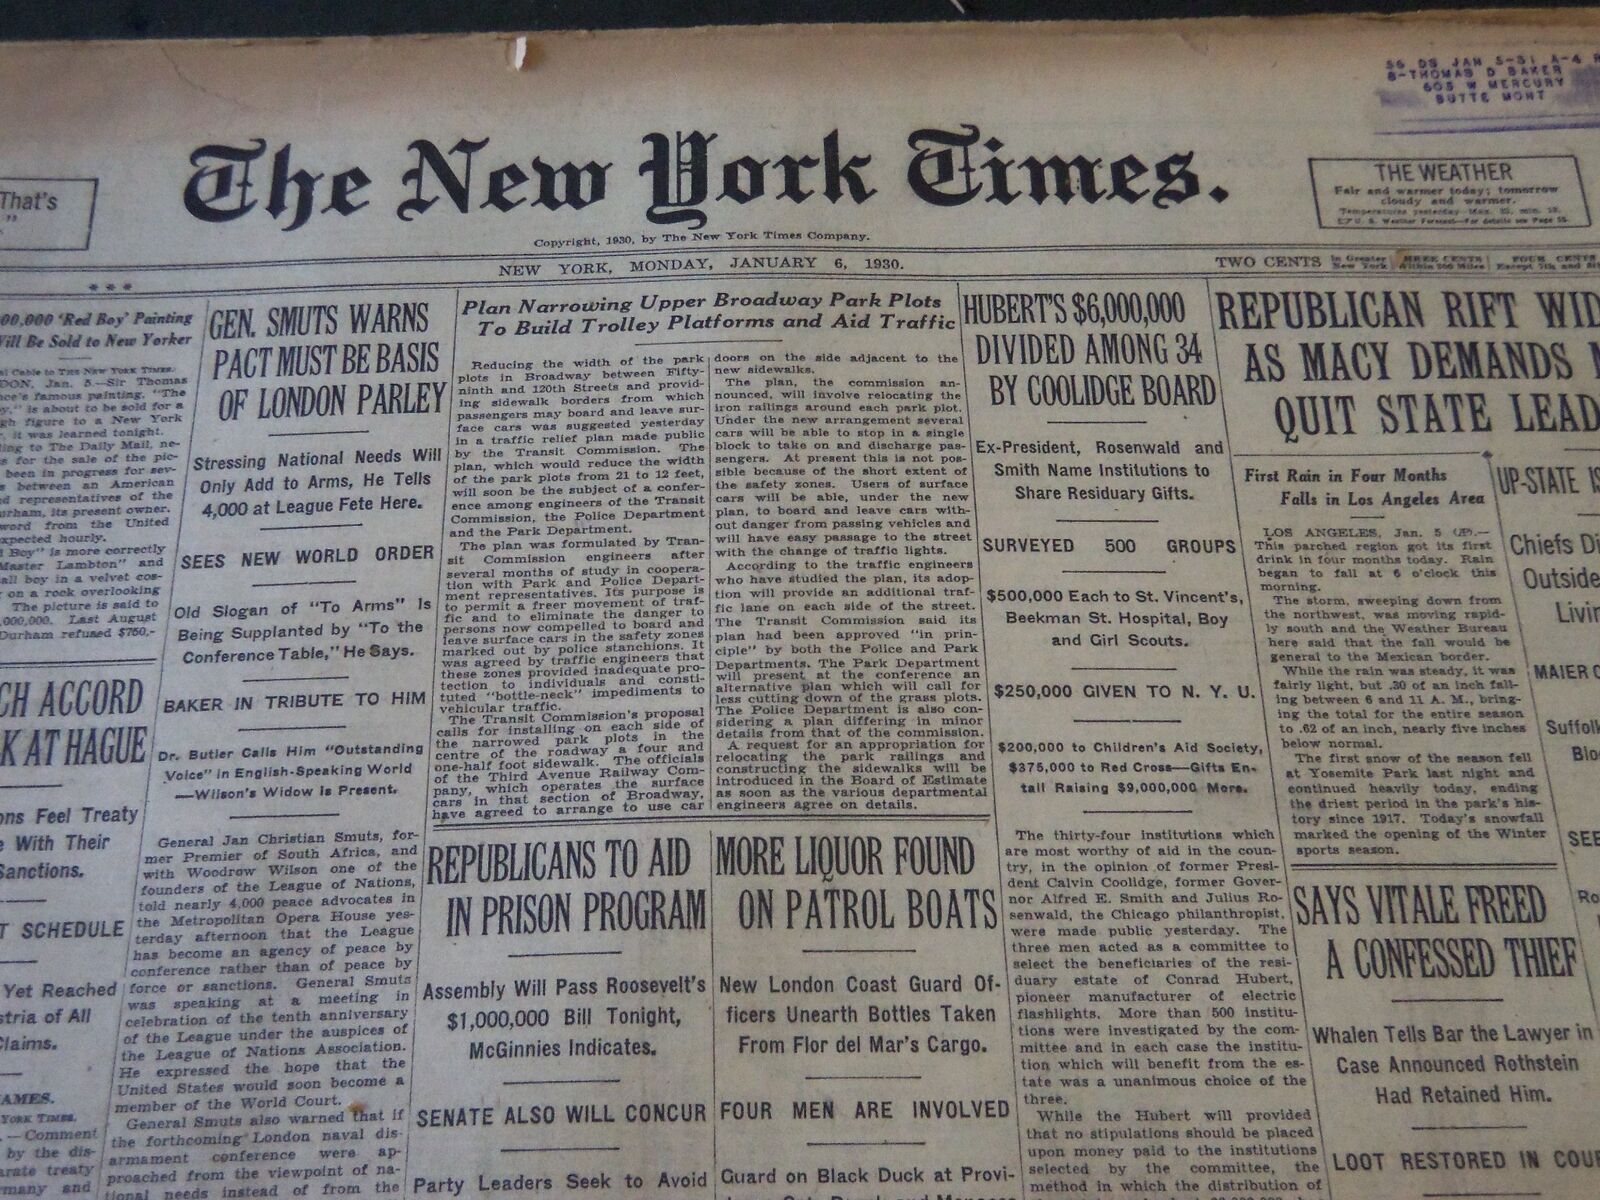 1930 JANUARY 6 NEW YORK TIMES - HUBERT'S $6,000,000 DIVIDEND AMONG 3Y - NT 5700